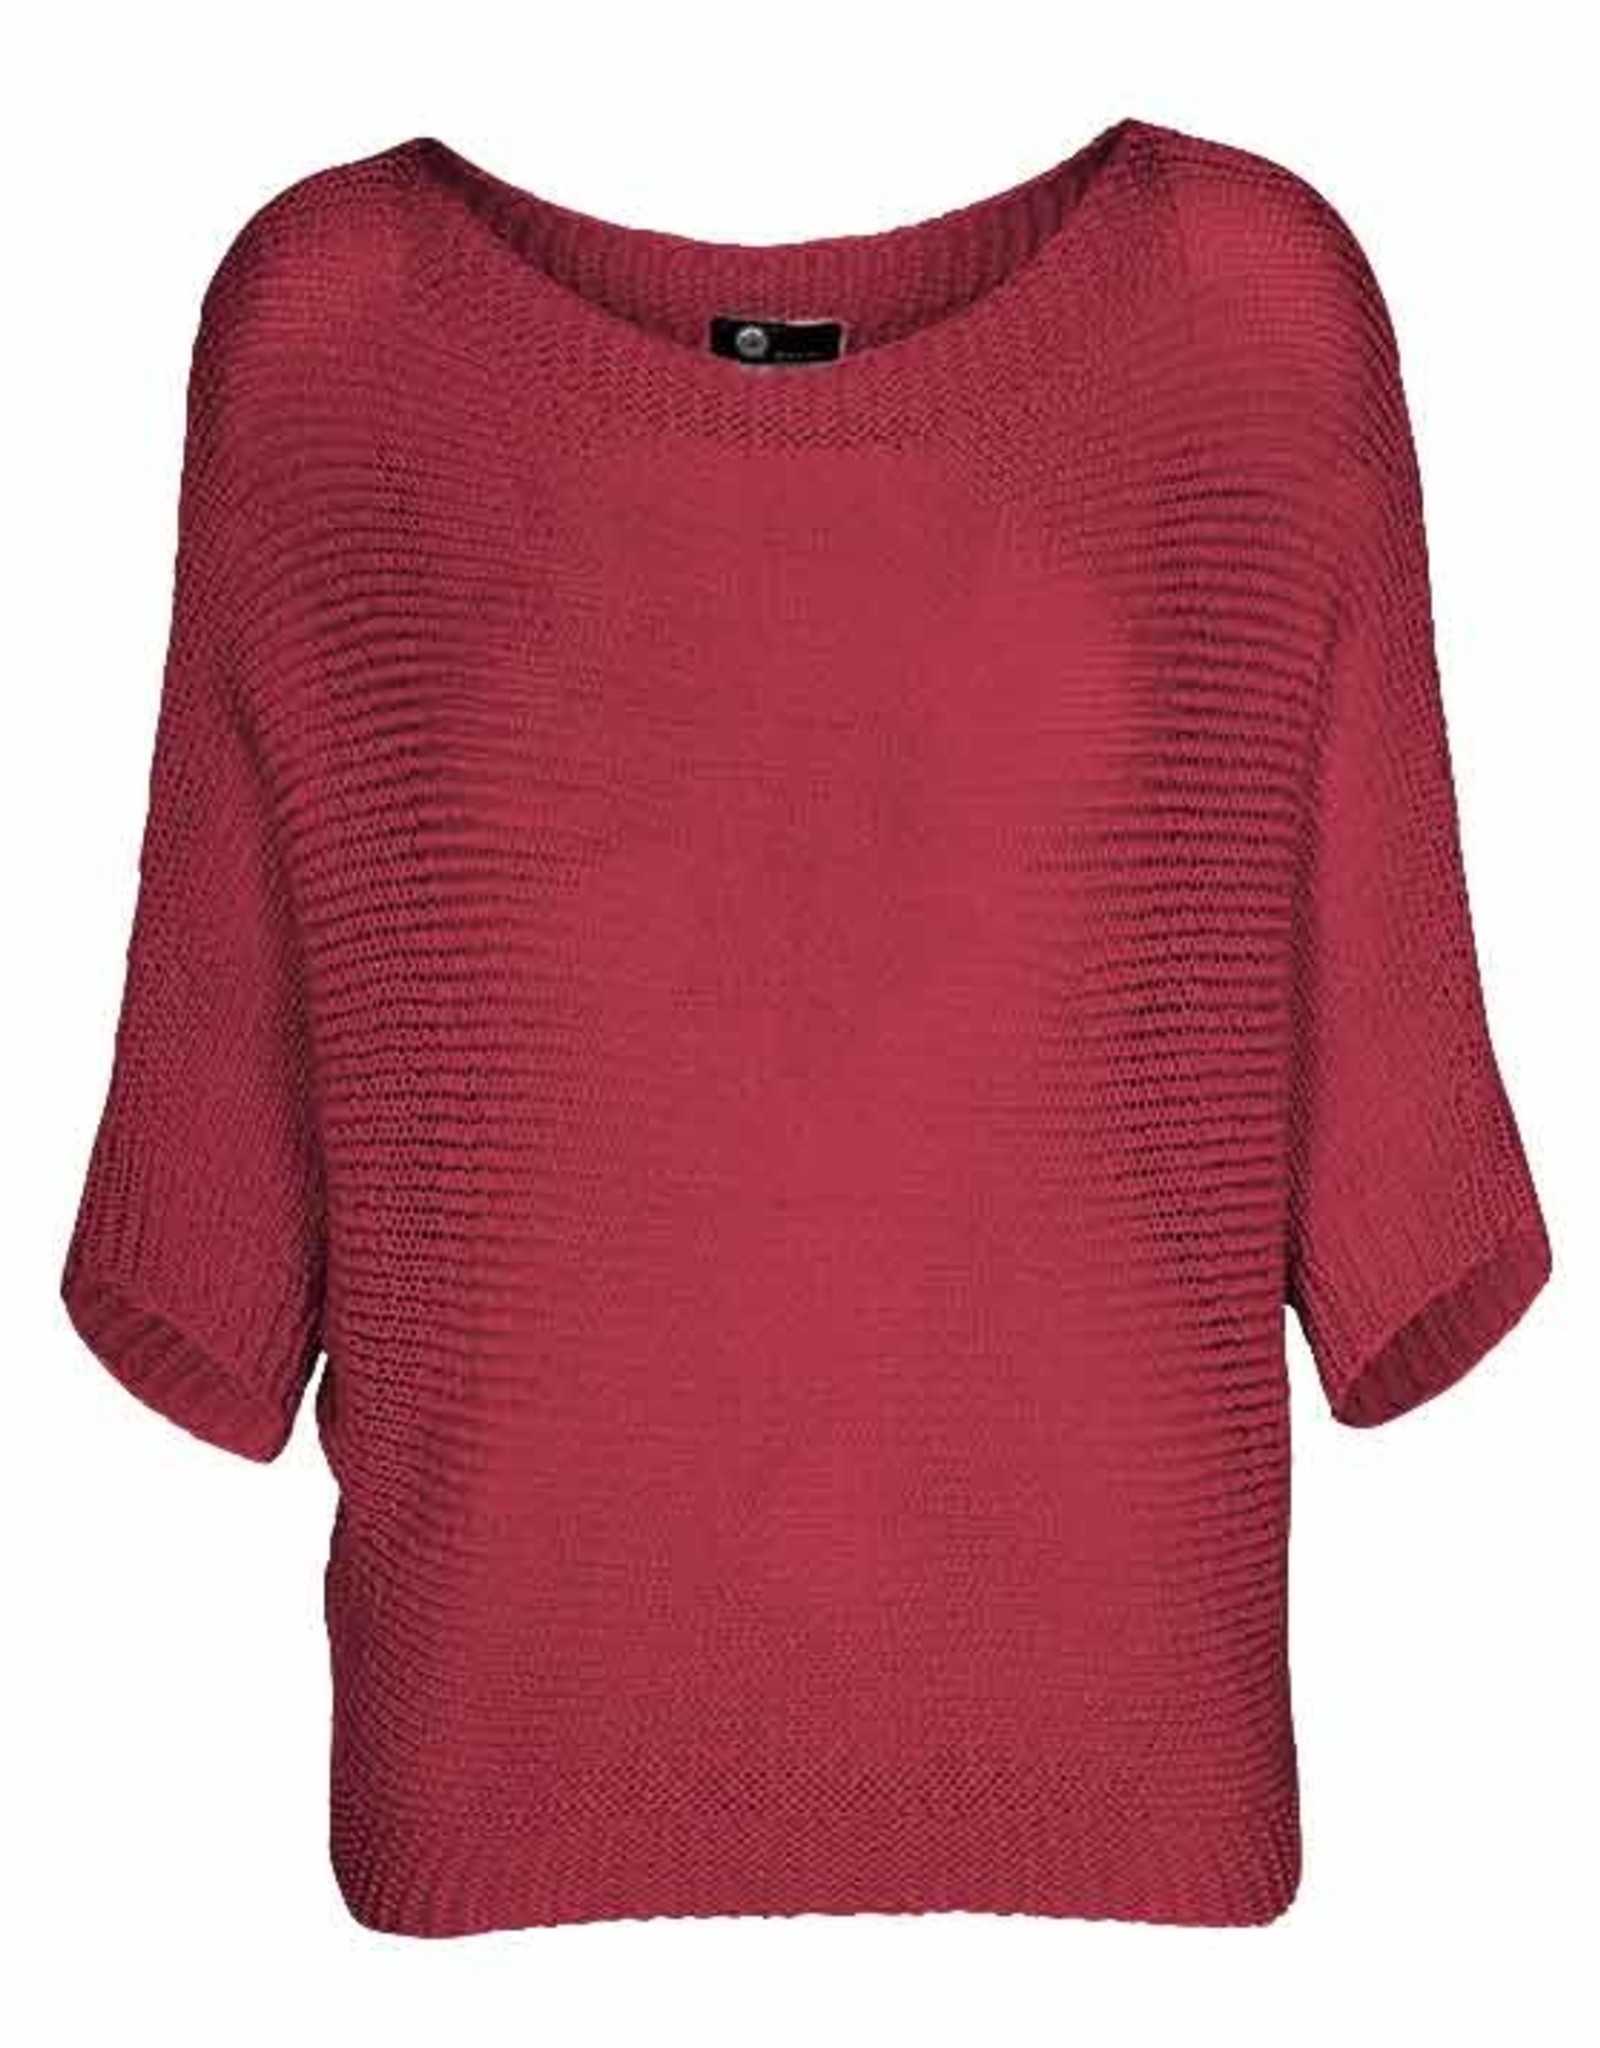 M Made in Italy Crochet 3/4 SLeeve Top